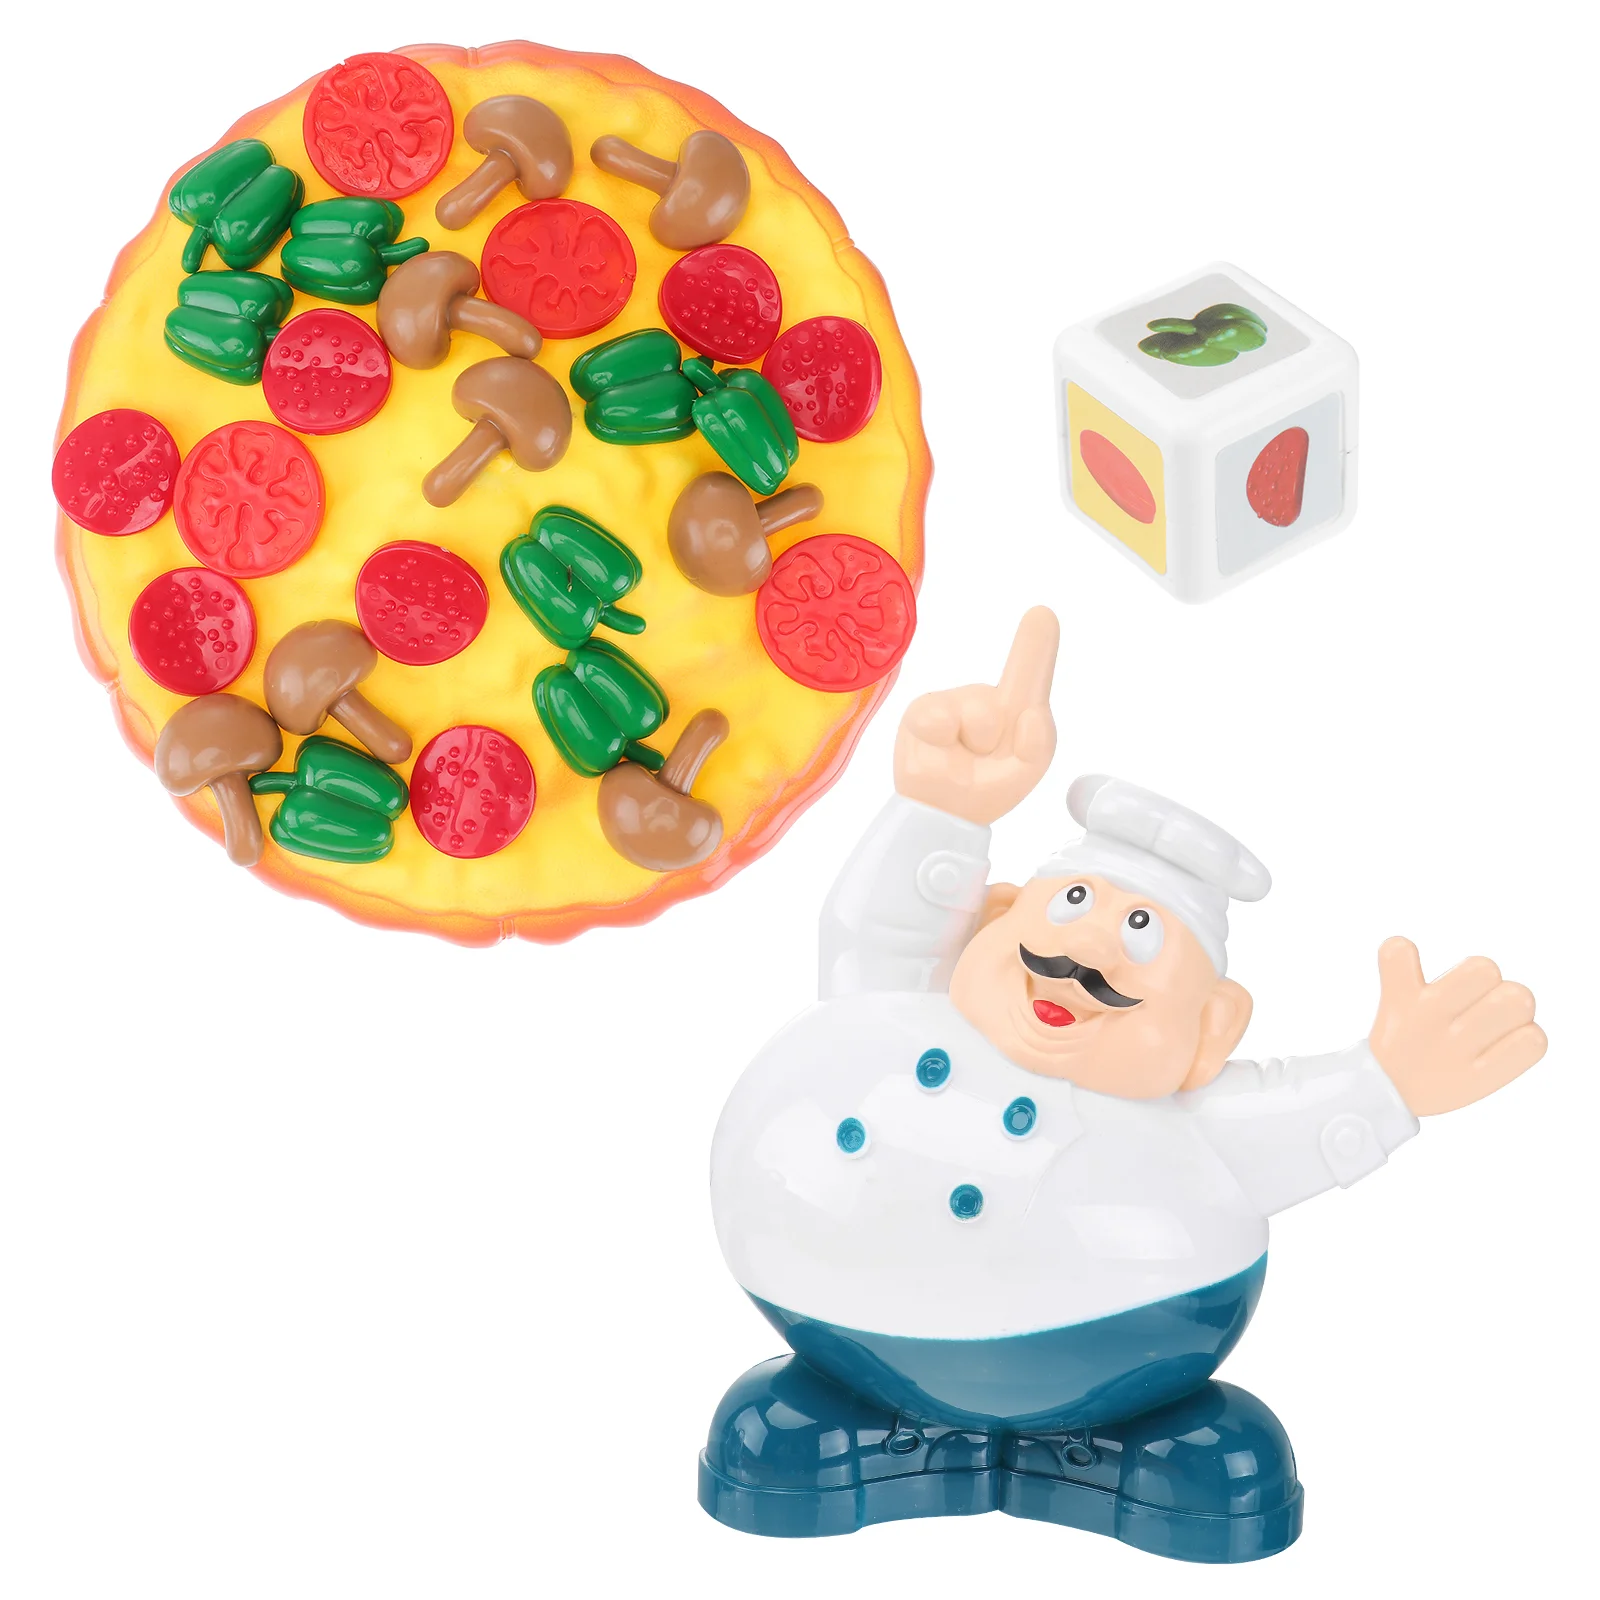 Stacking Pizza Toys Balancing Game with Chef Model Vegetable Dice Interactive Stacker Puzzle Early Educational Toys for Kids